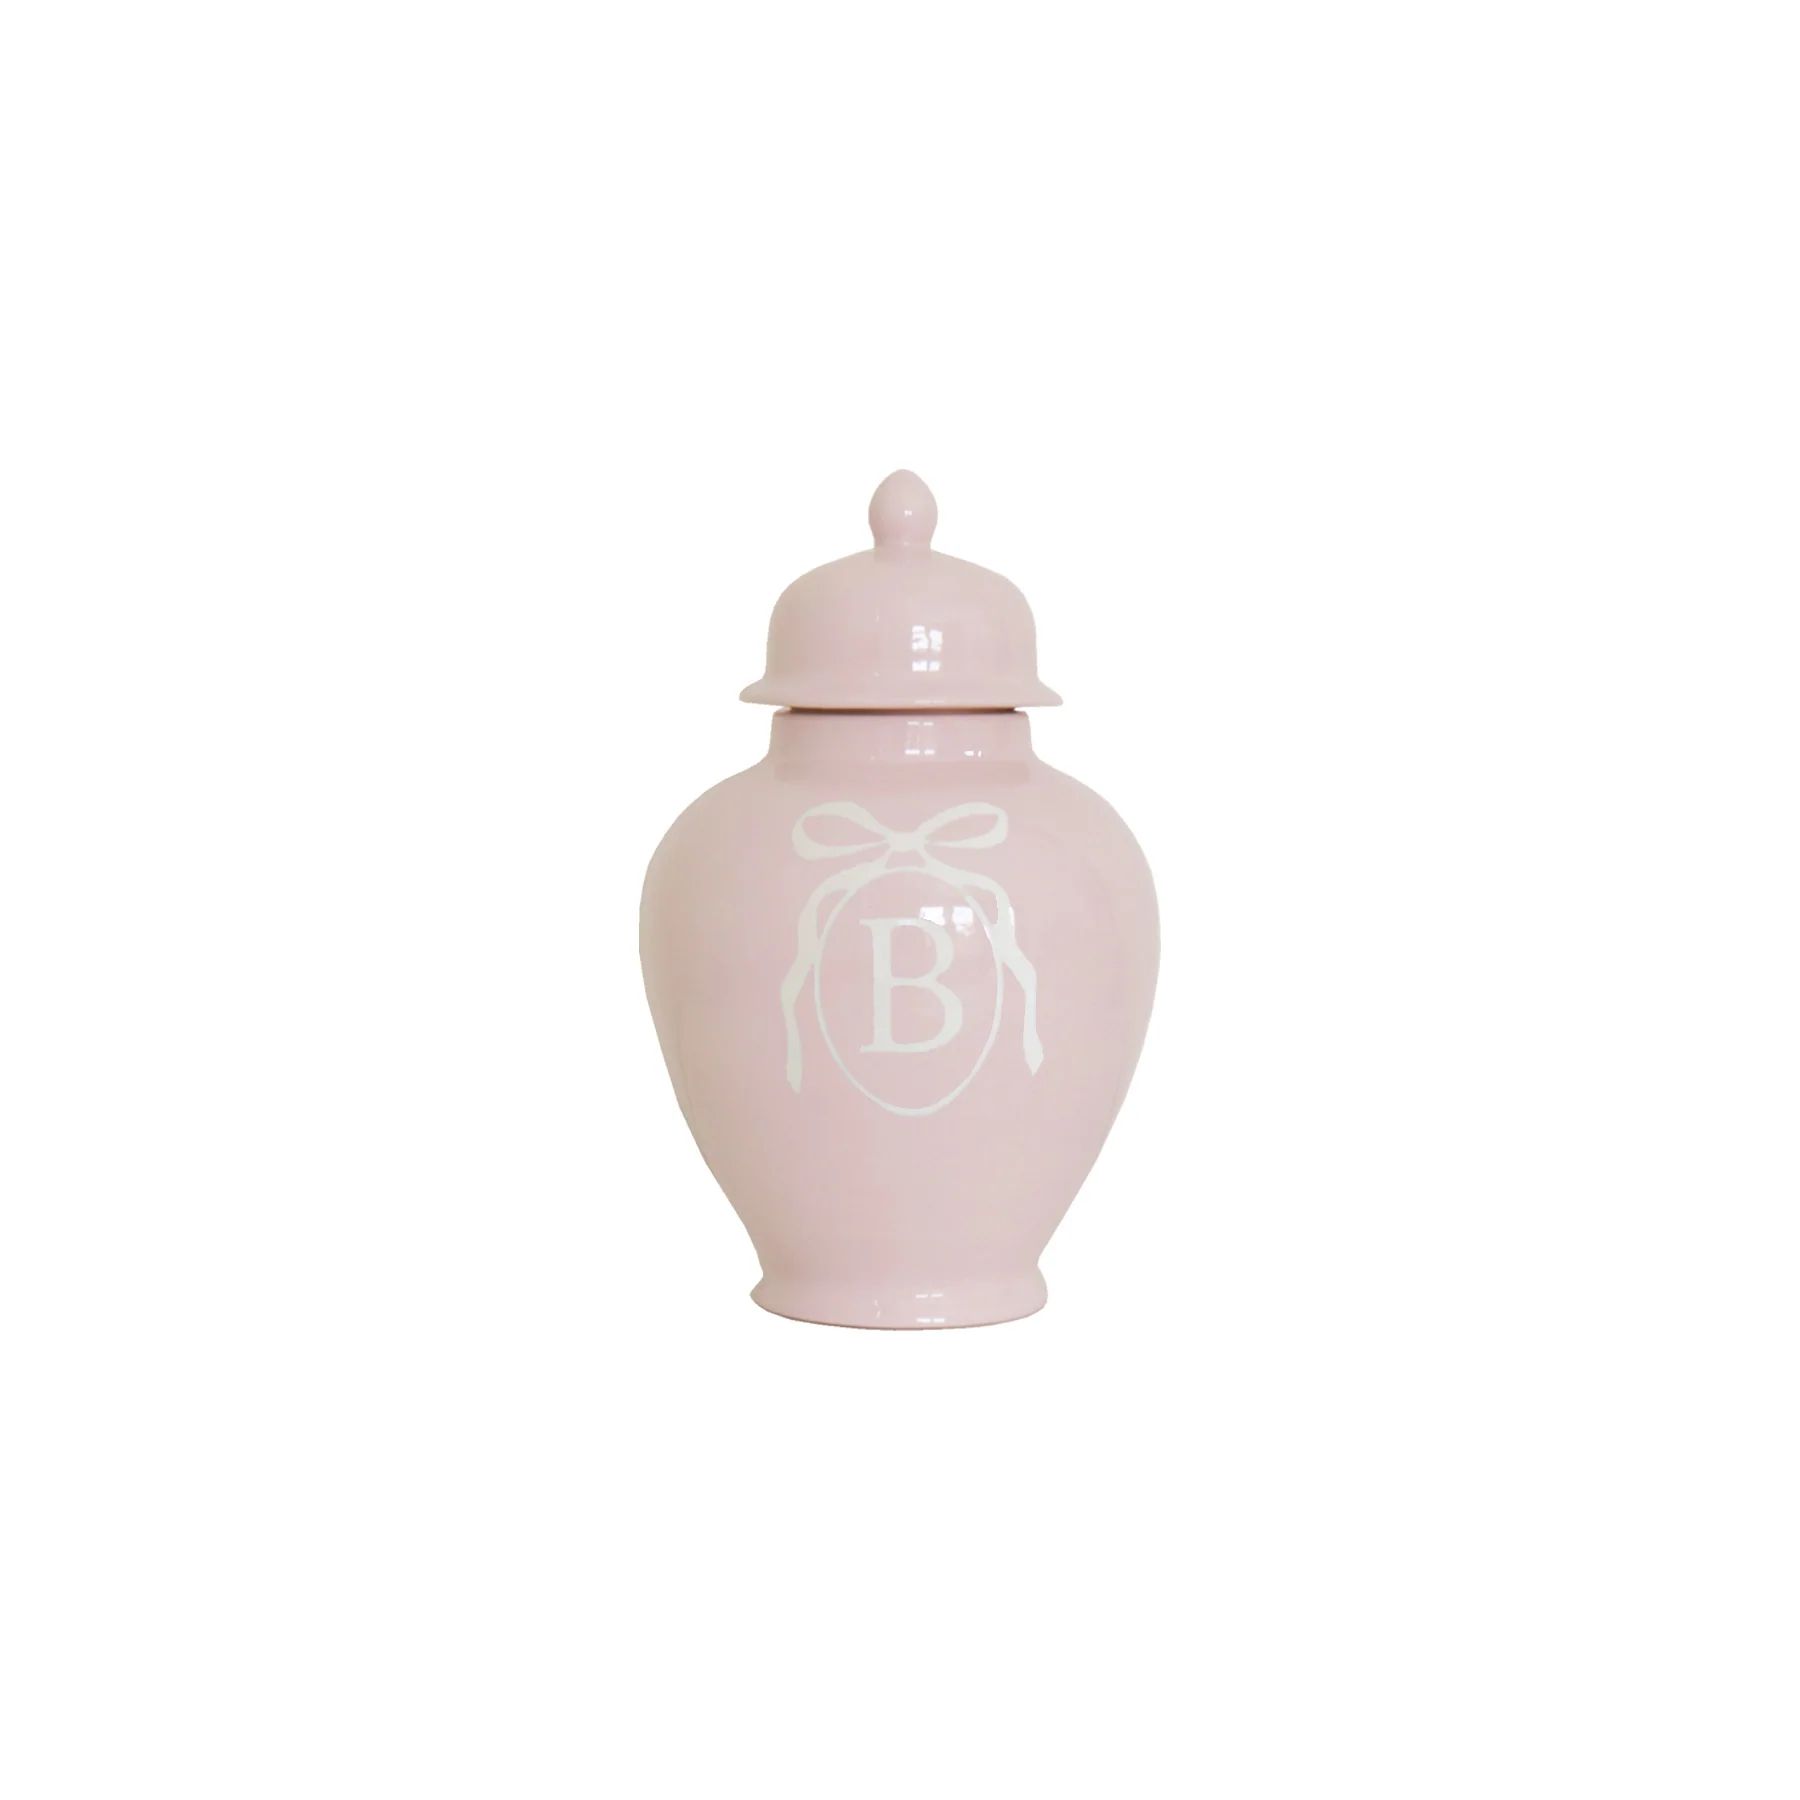 Monogrammed Bow Ginger Jars in Cherry Blossom Pink for Lo Home x Veronika's Blushing | Lo Home by Lauren Haskell Designs